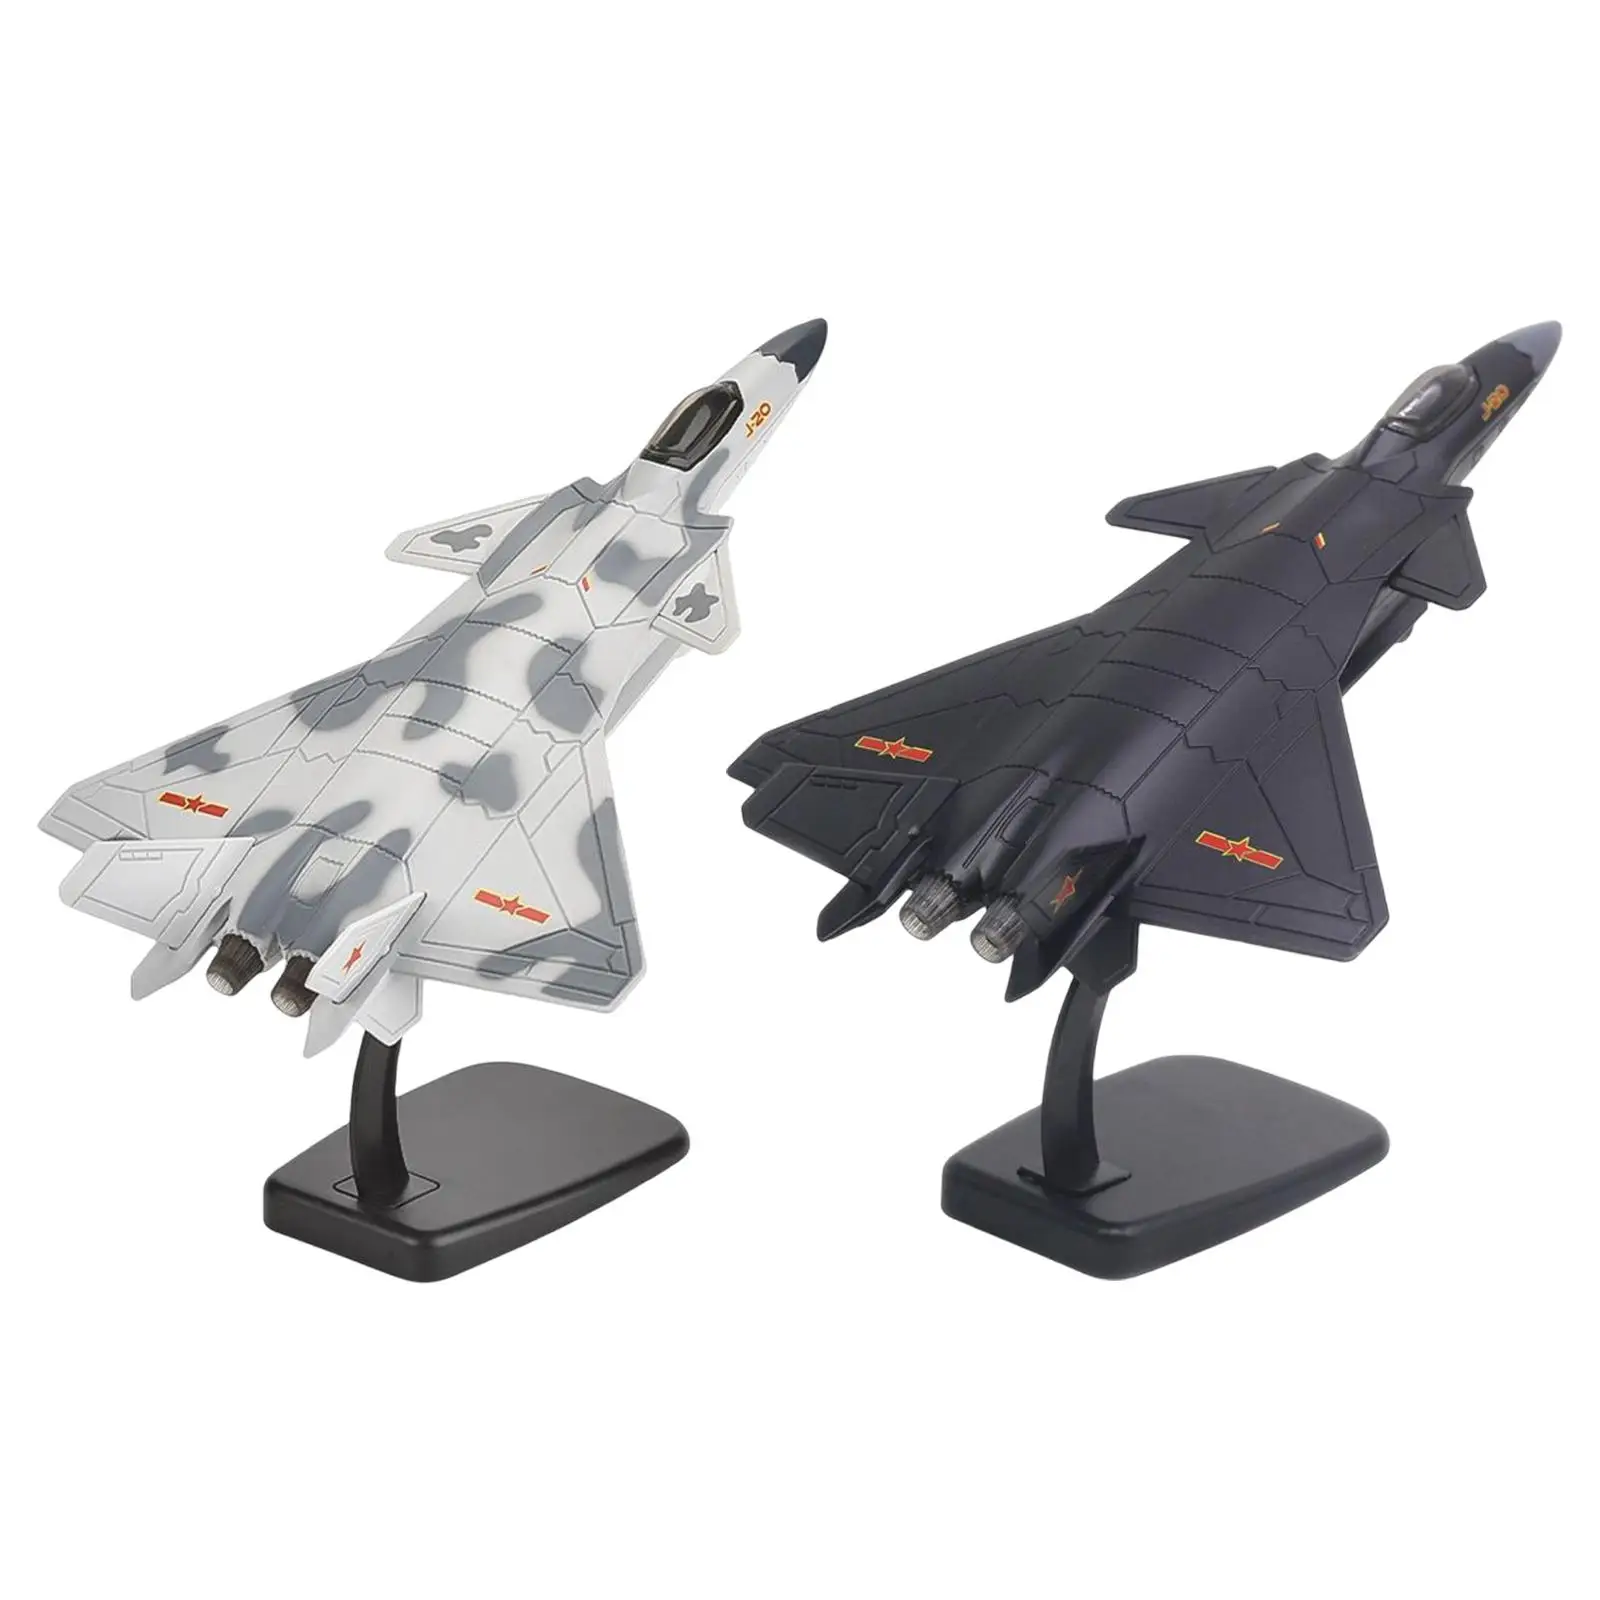 

1/144 Airplane Fighter Model Airplane Aircraft Plane Toy for Living Room Home Office Decor Ornament